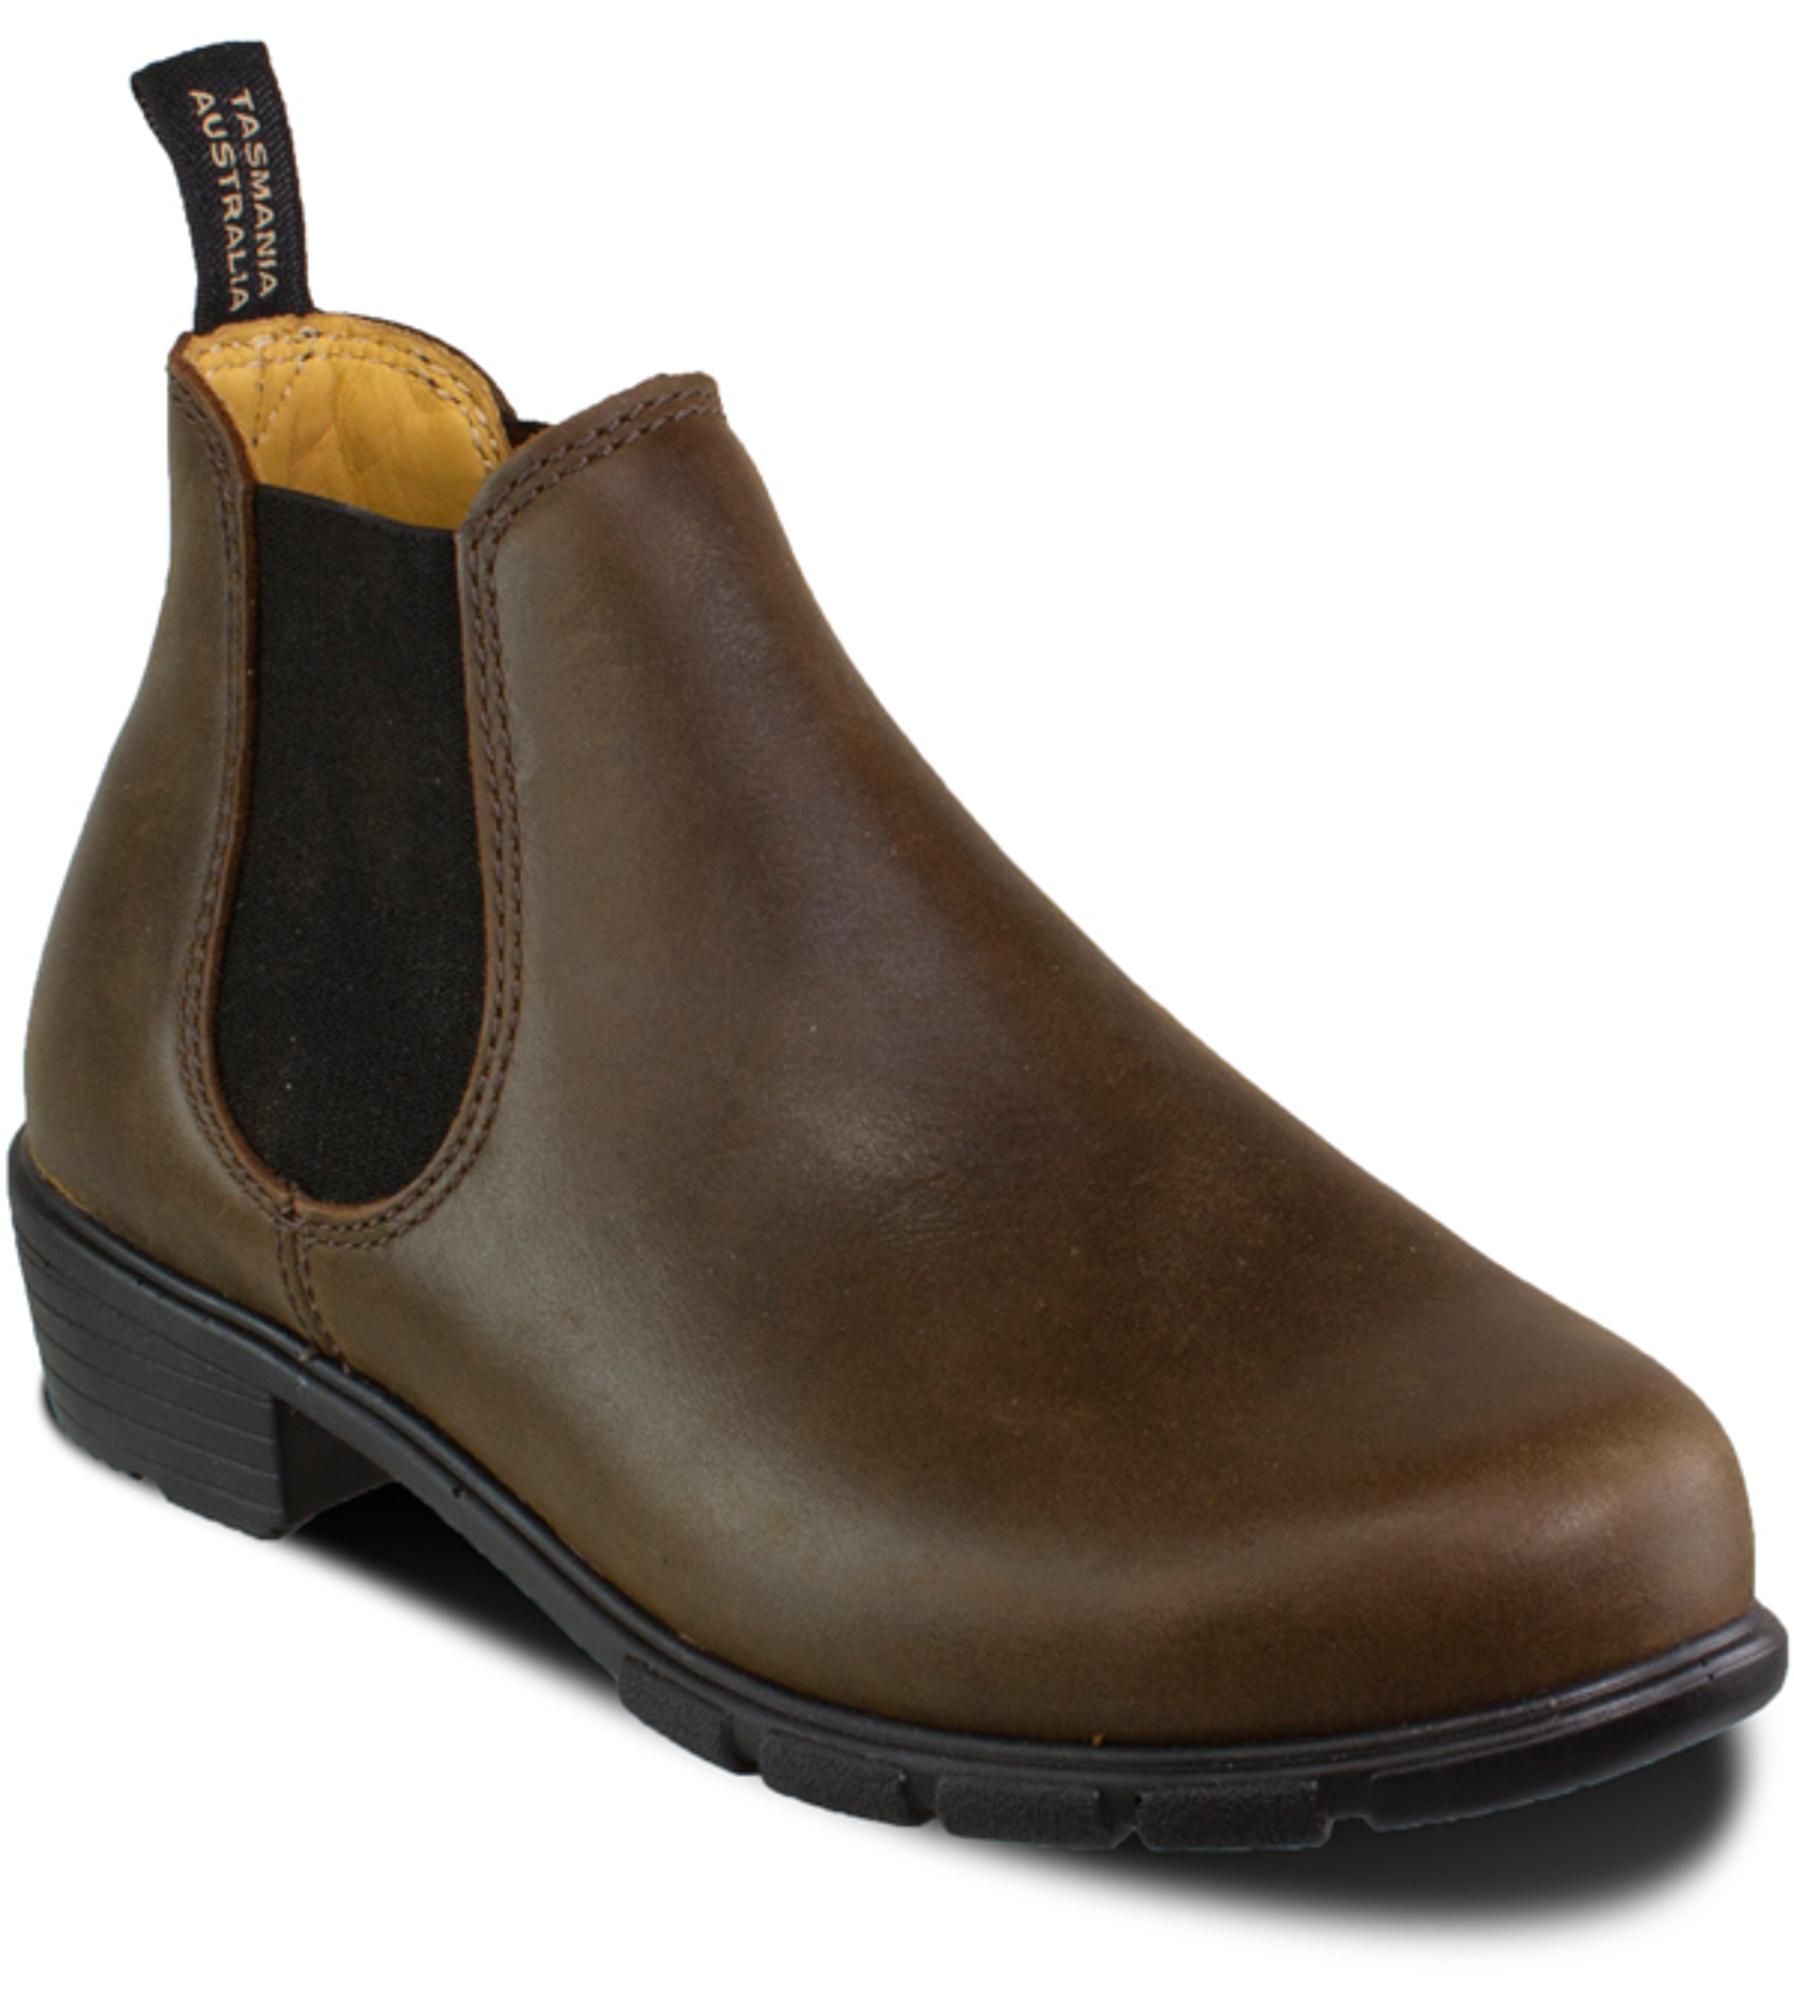 Womens 1970 Ankle - Antique brown 